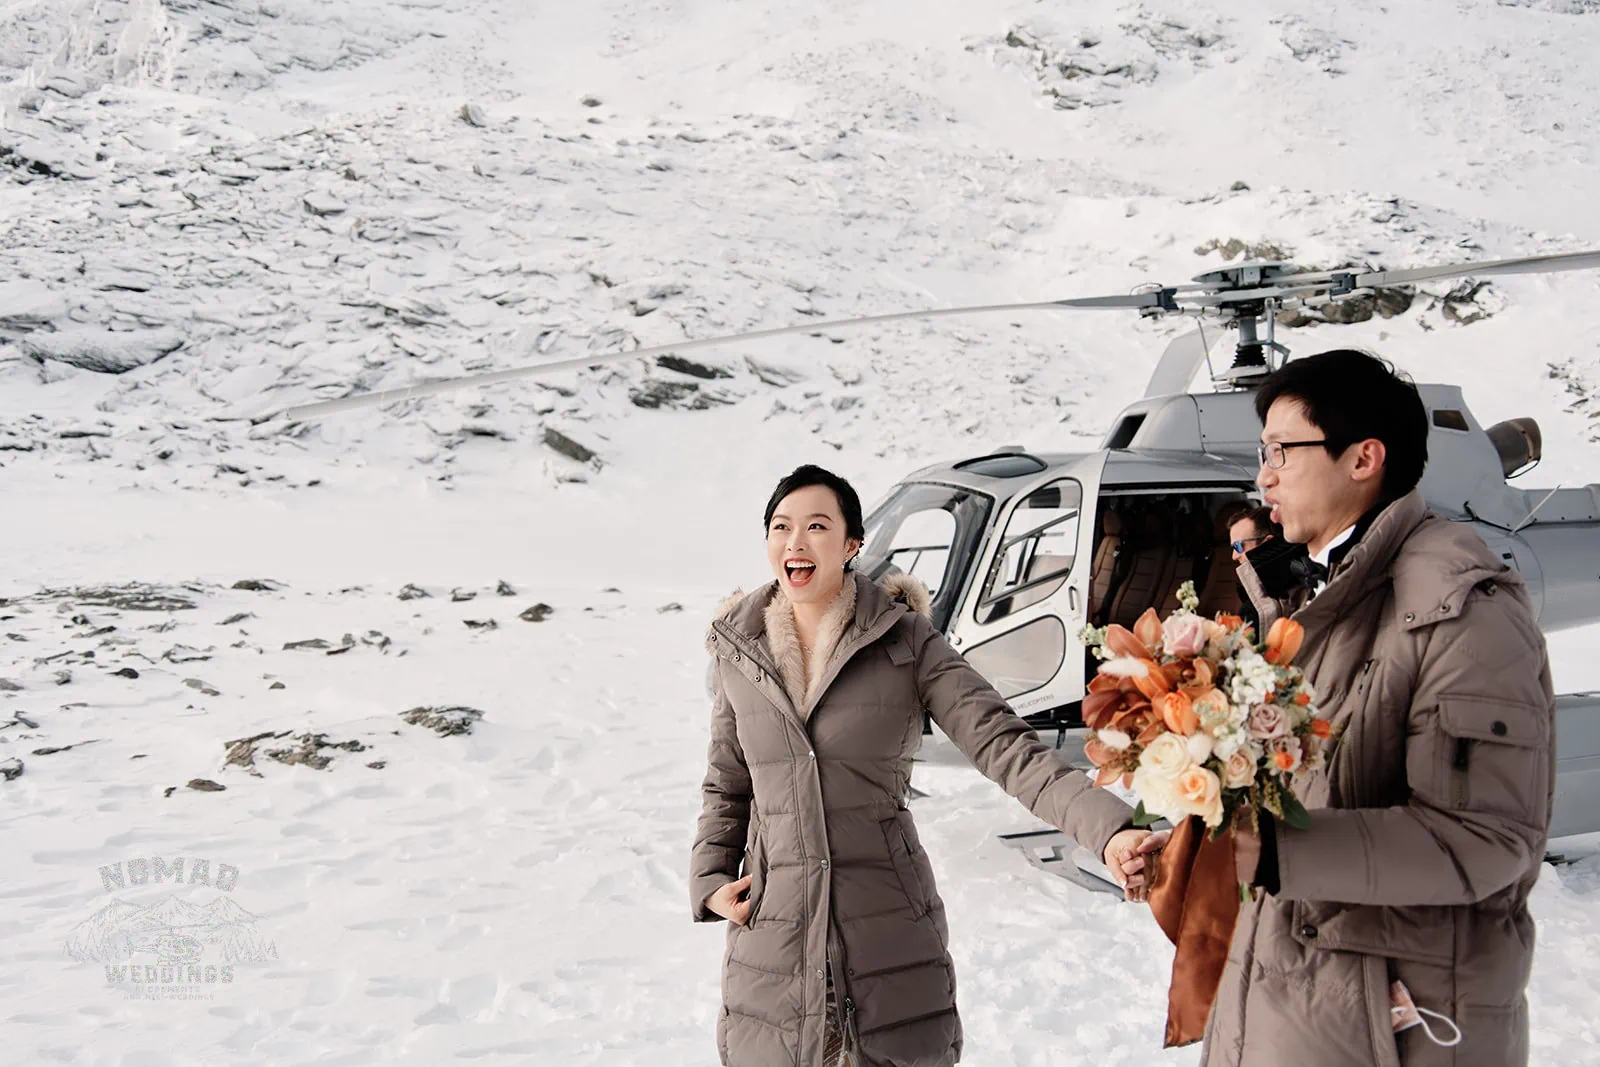 A pre-wedding shoot in Queenstown, New Zealand, featuring Joanna and Tony standing next to a helicopter in the snowy landscape.